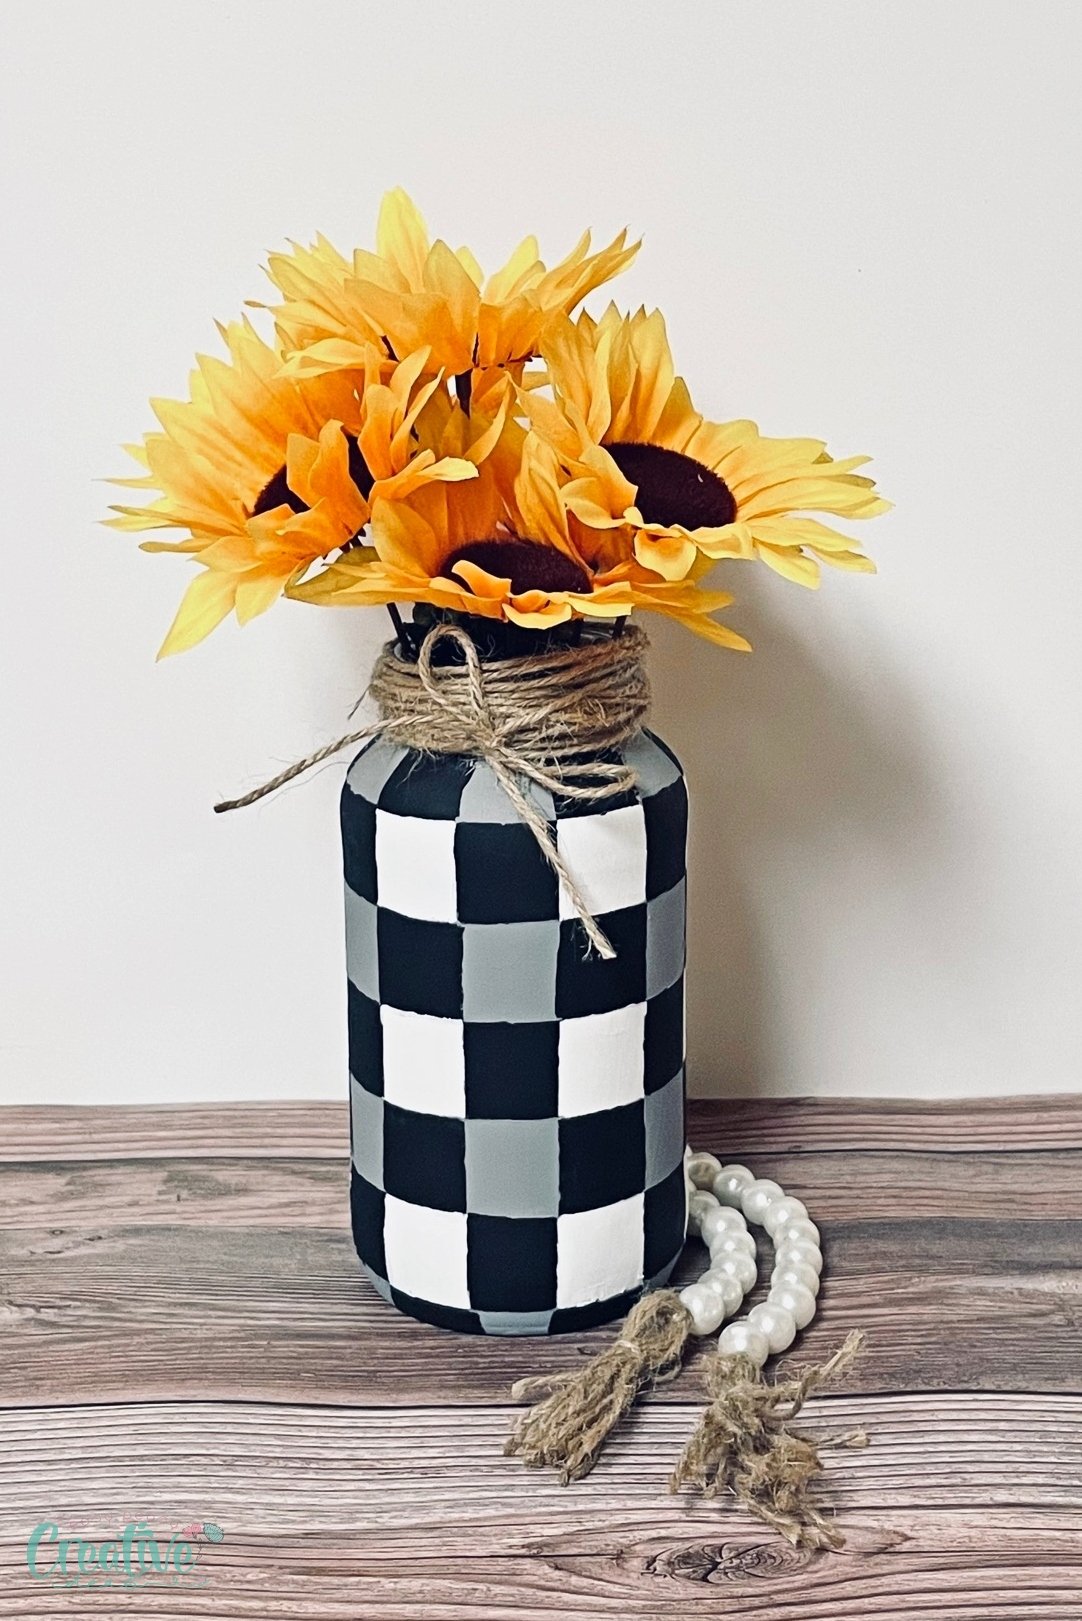 Upcycled vase from pasta sauce jar